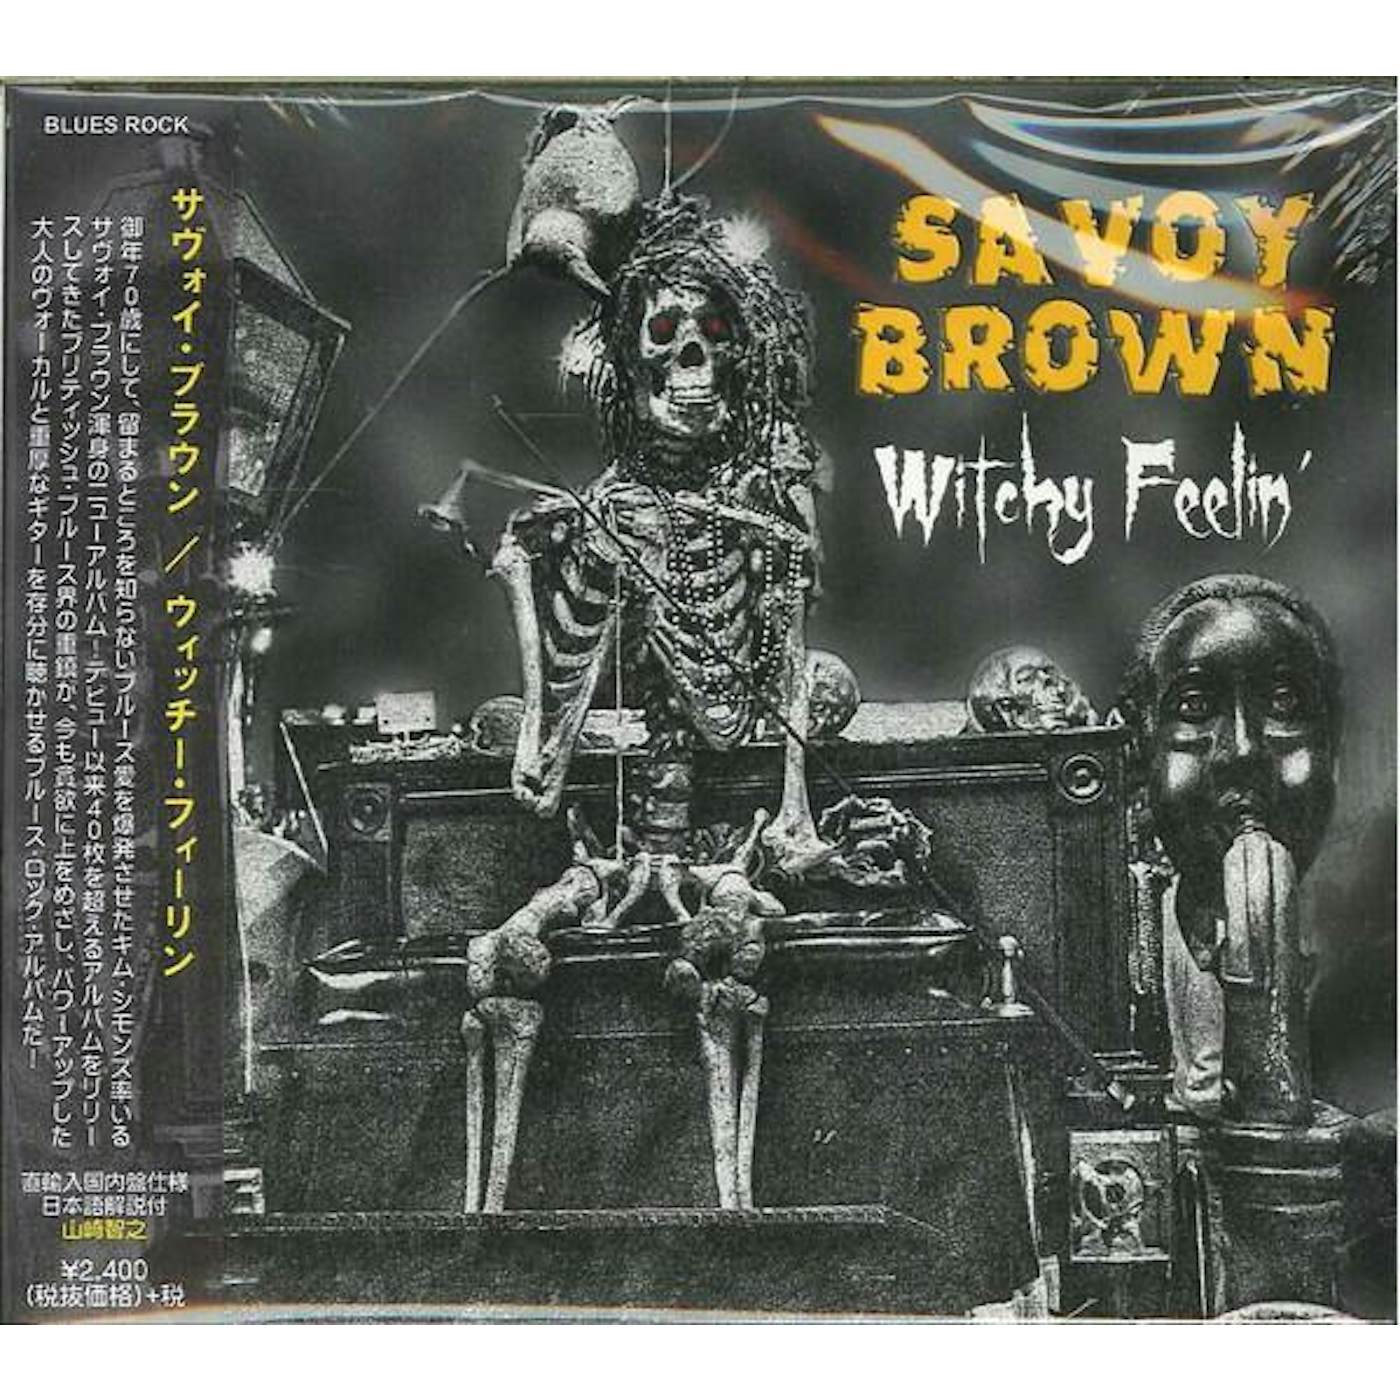 Savoy Brown WITCHY FEELIN' CD